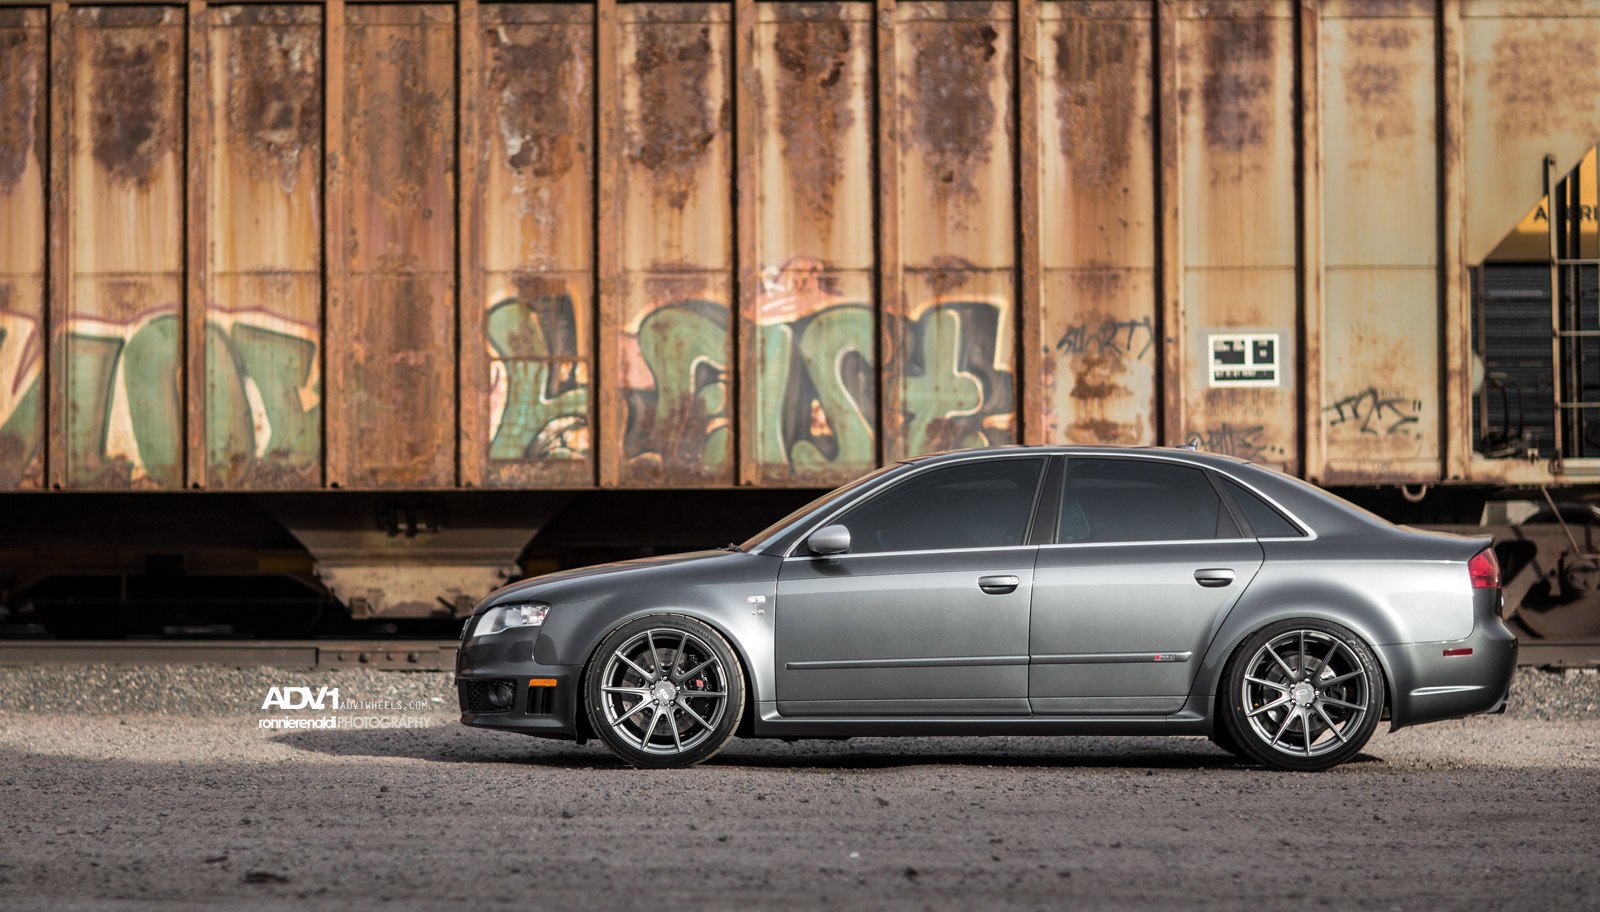 Custom Side Skirts on Silver Audi S4 - Photo by ADV.1